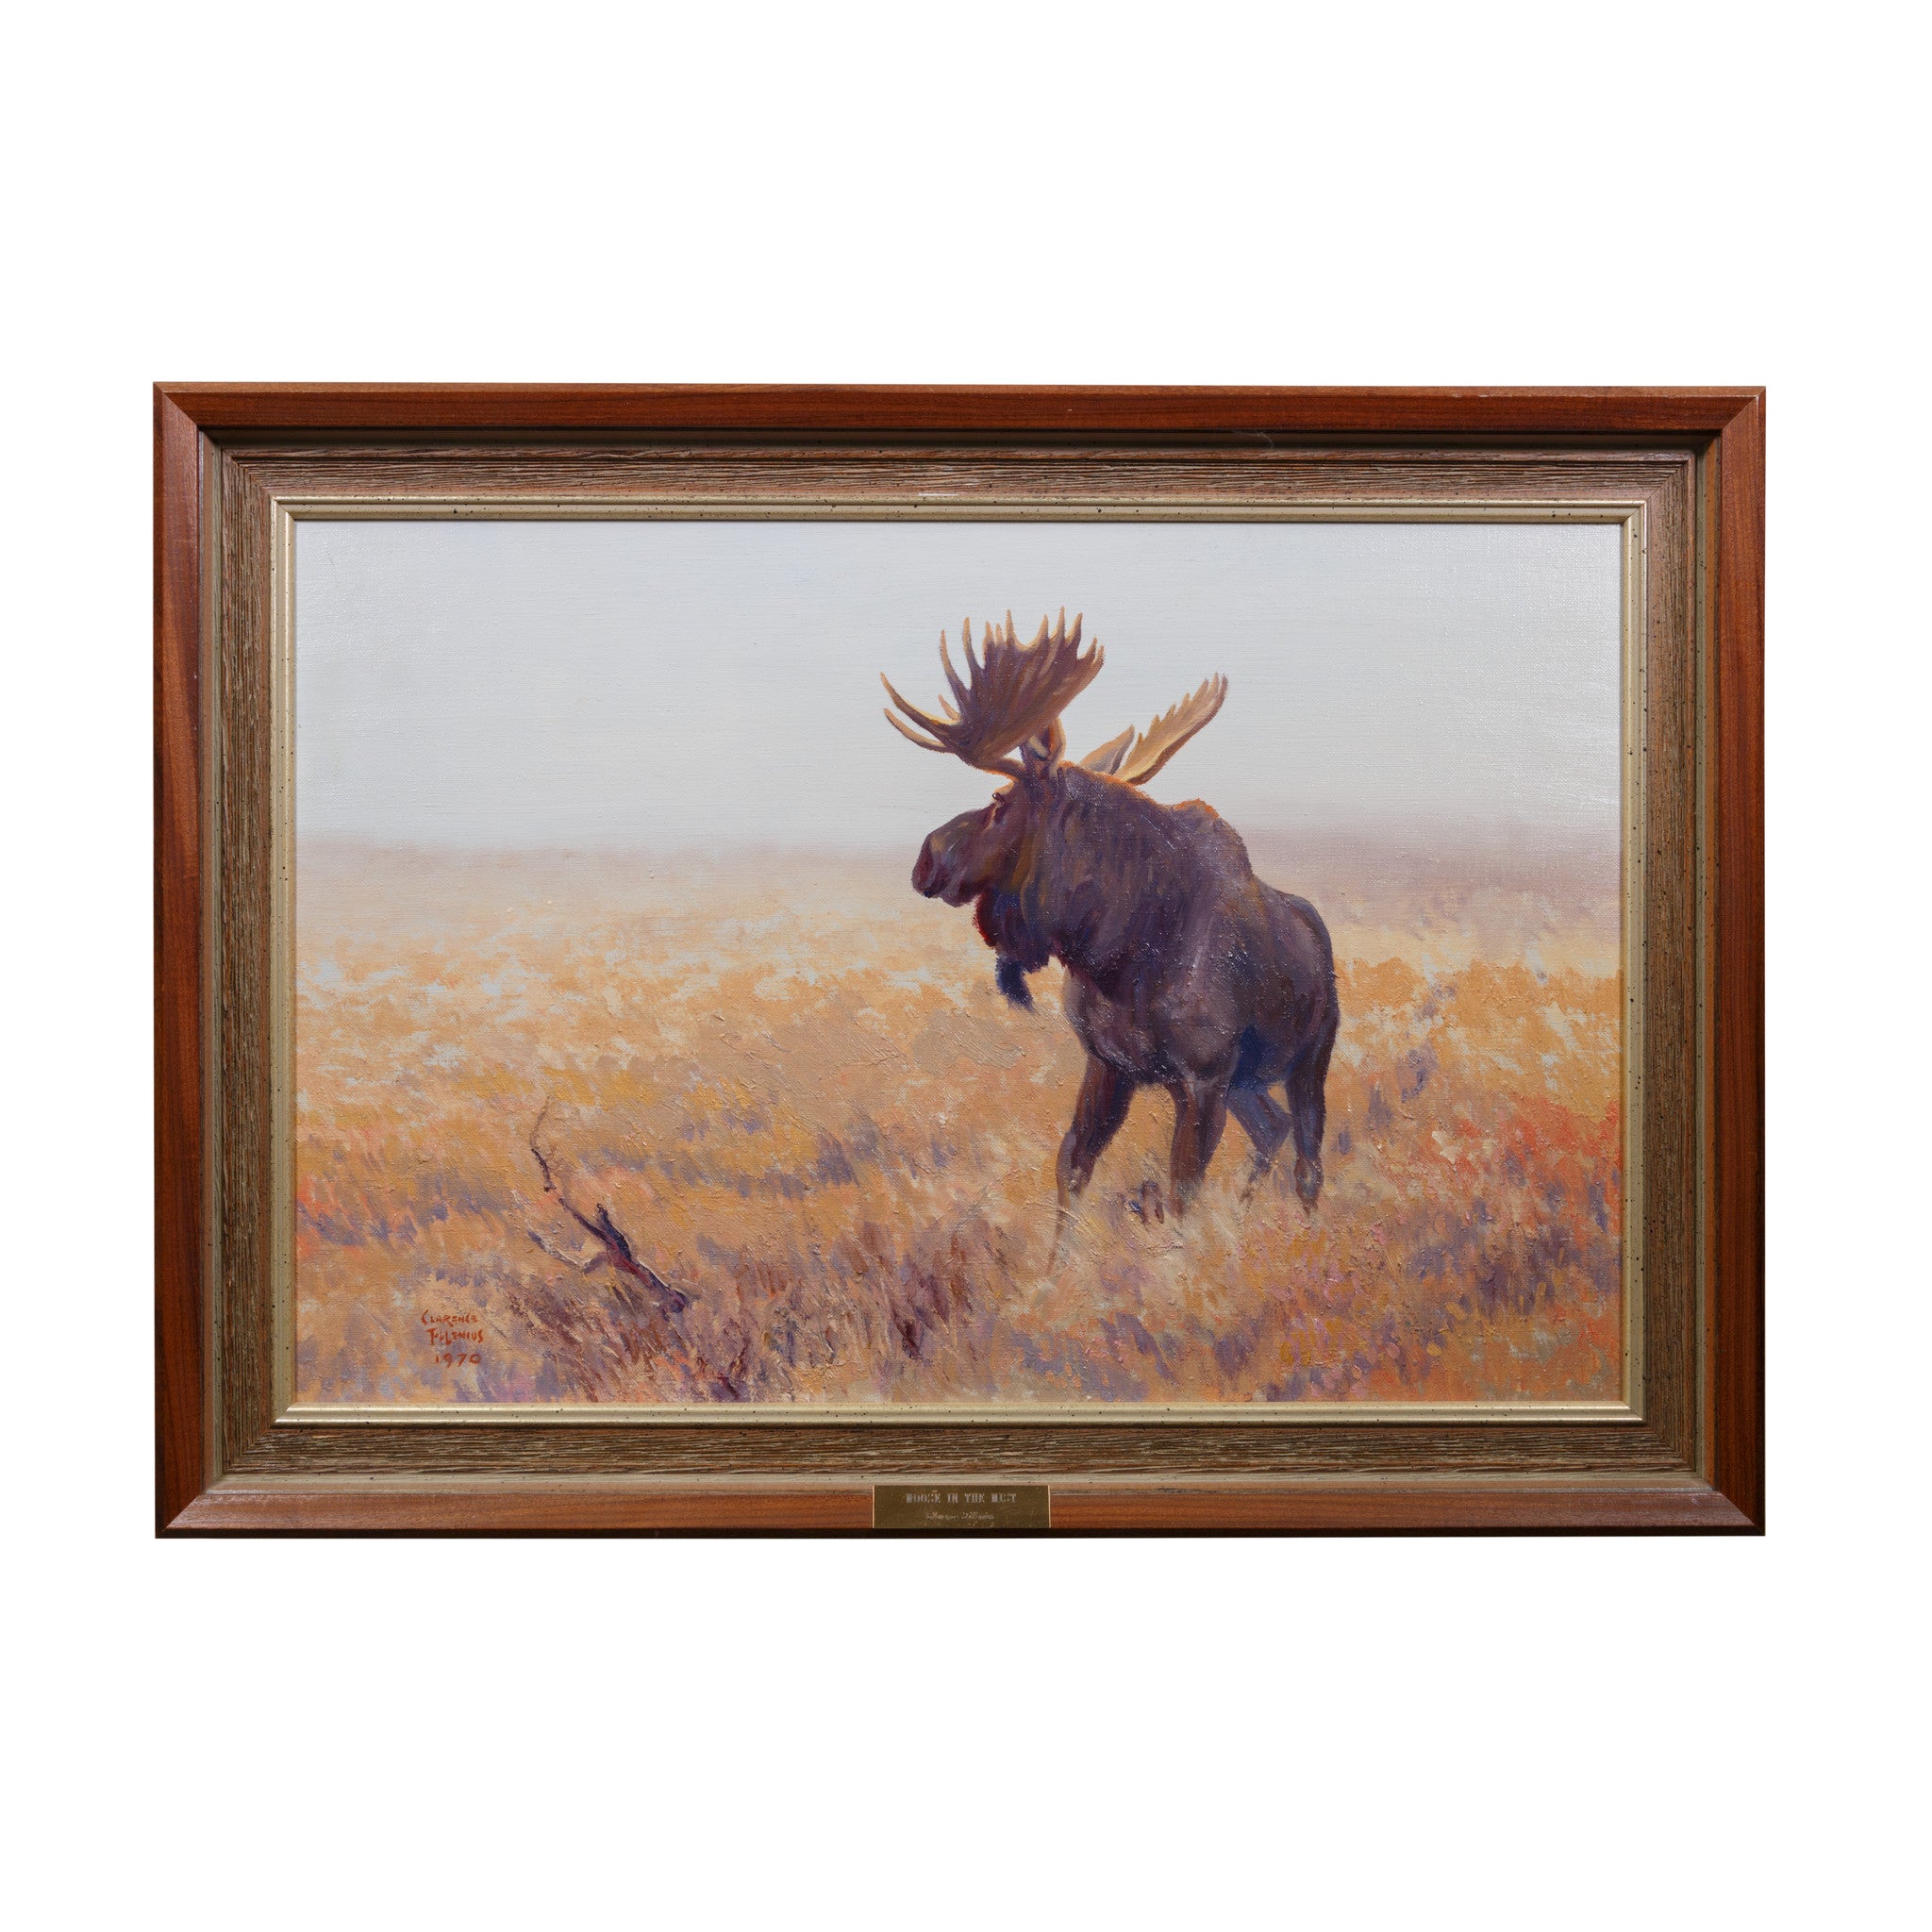 Moose in the Mist by Clarence Tillenius